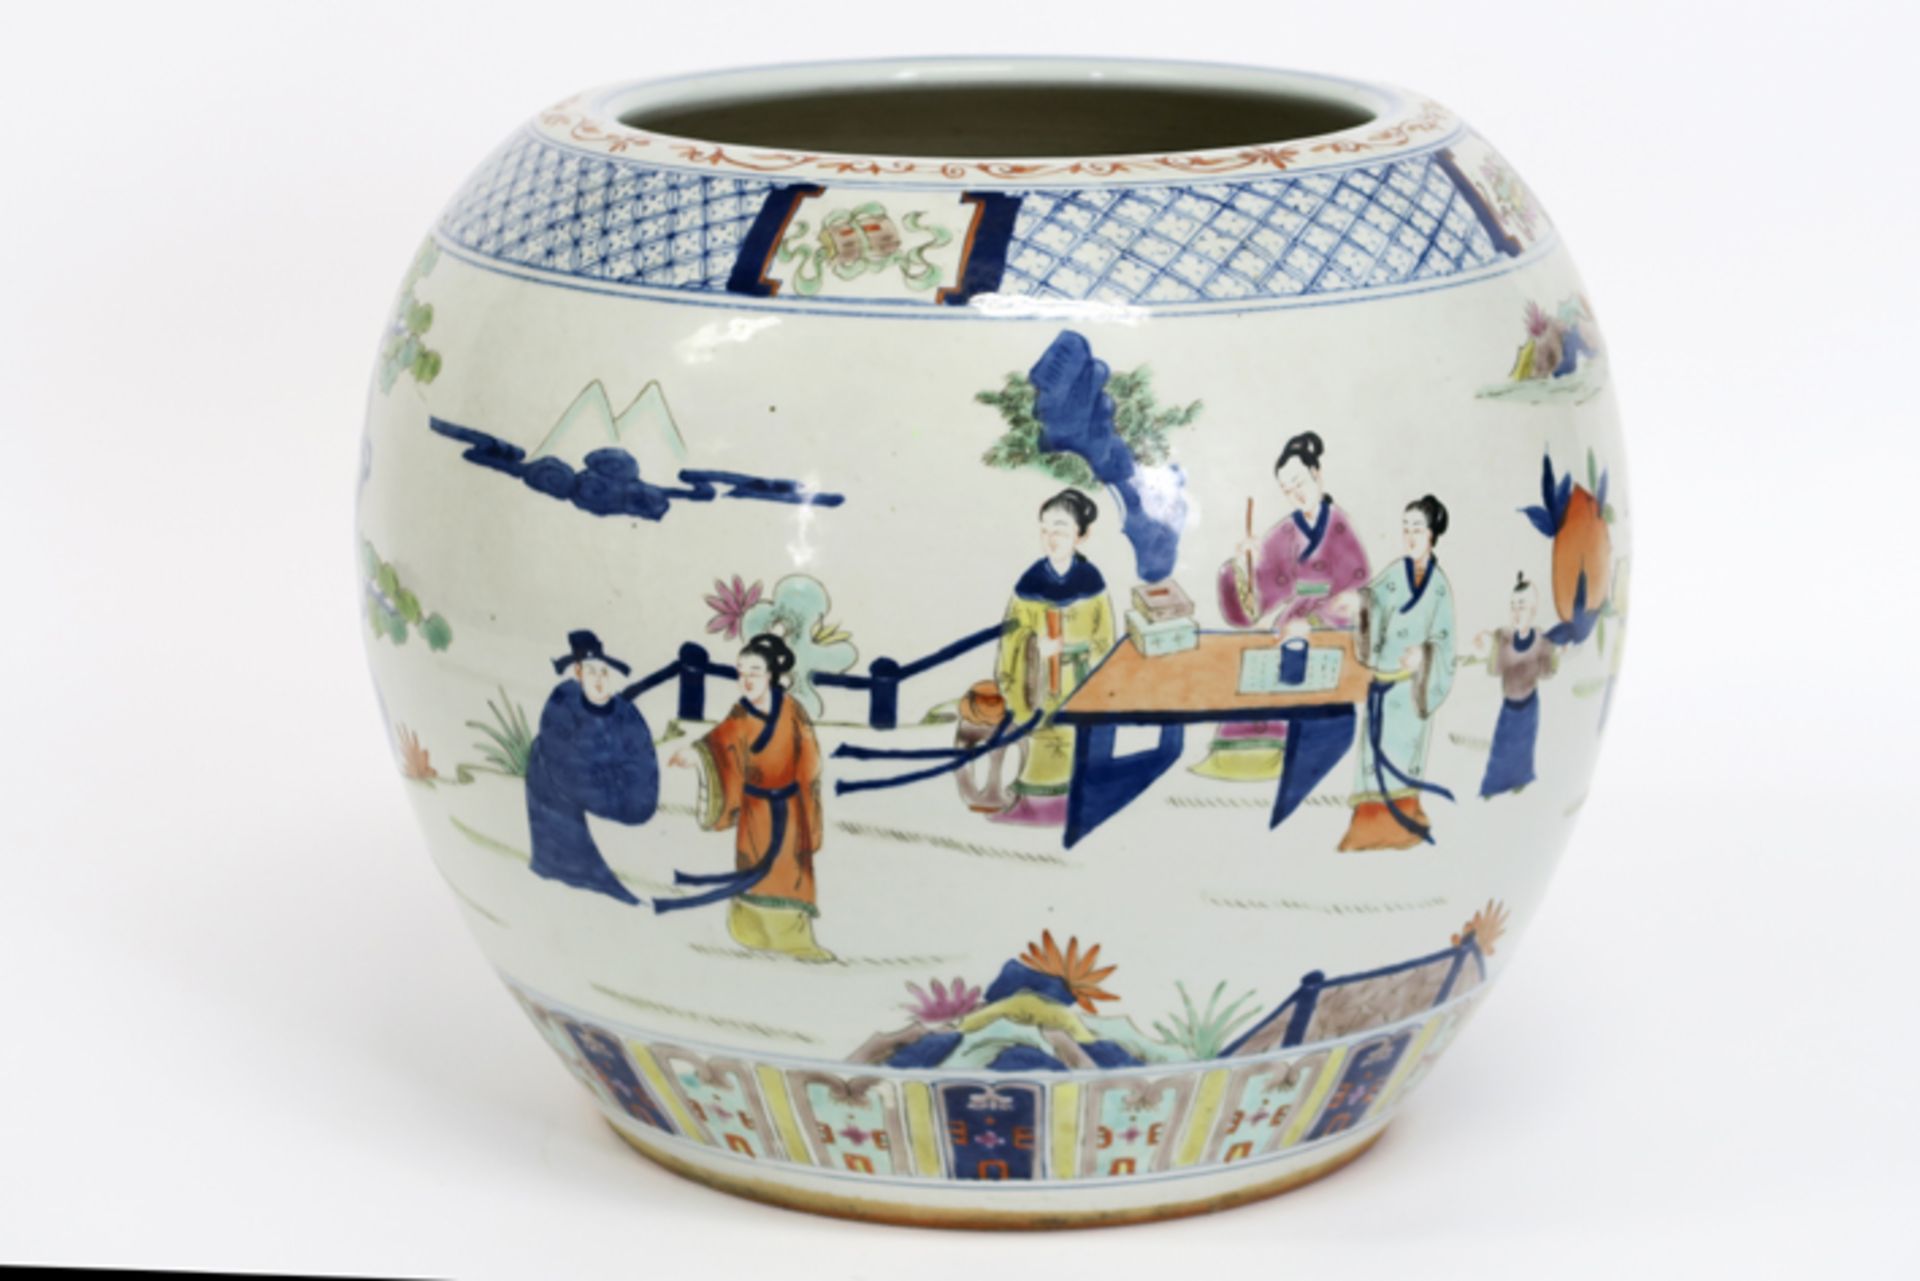 Chinese jardinier in porcelain with a polychrome figures decor - - Vrij grote [...] - Image 3 of 6